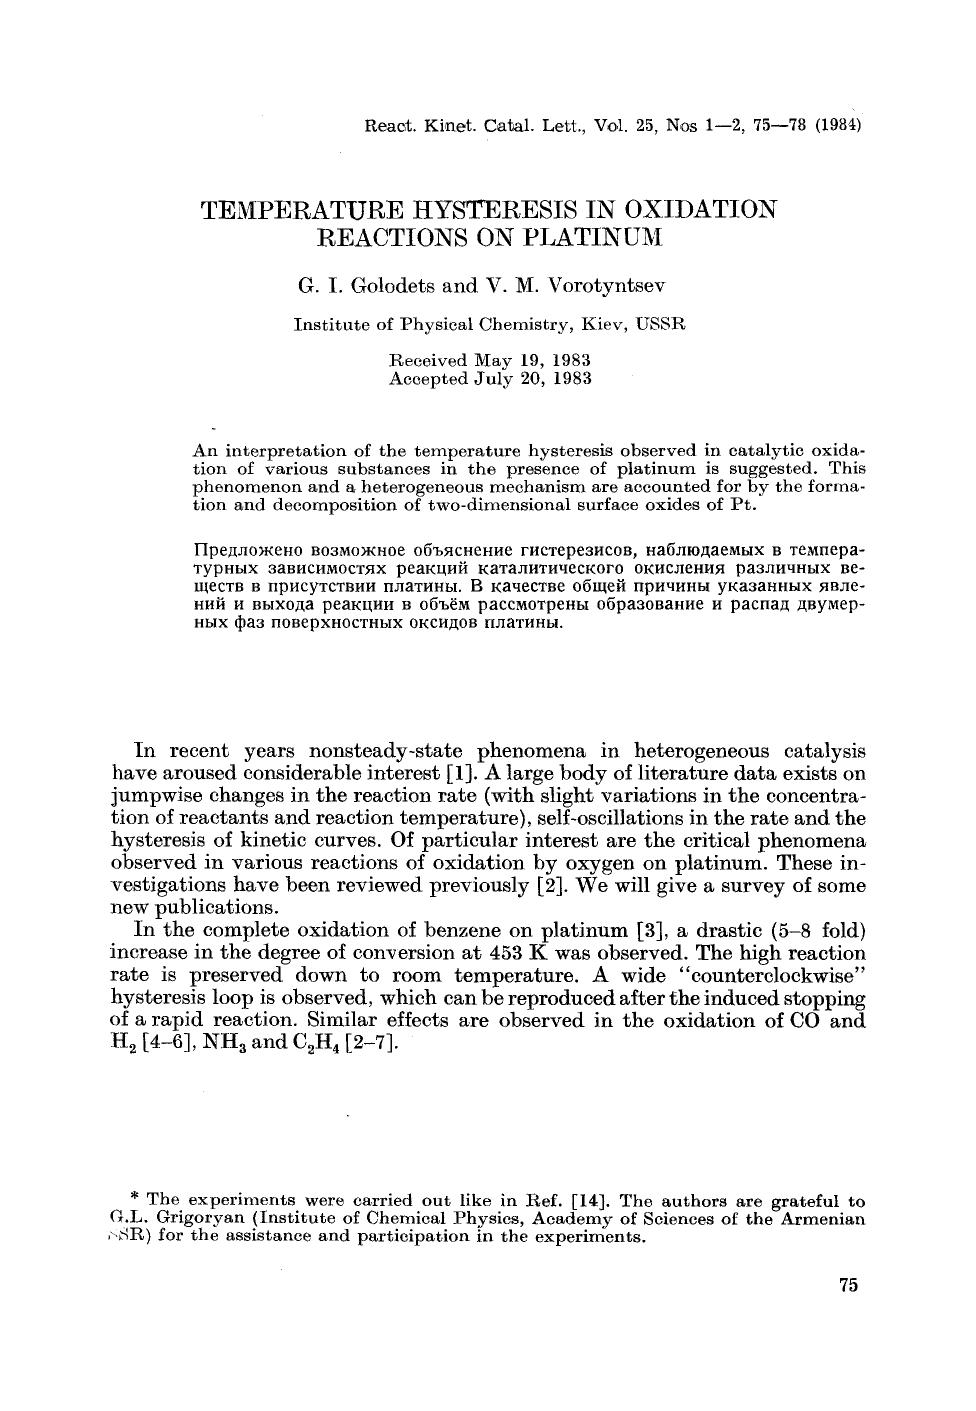 Temperature hysteresis in oxidation reactions on platinum by Unknown